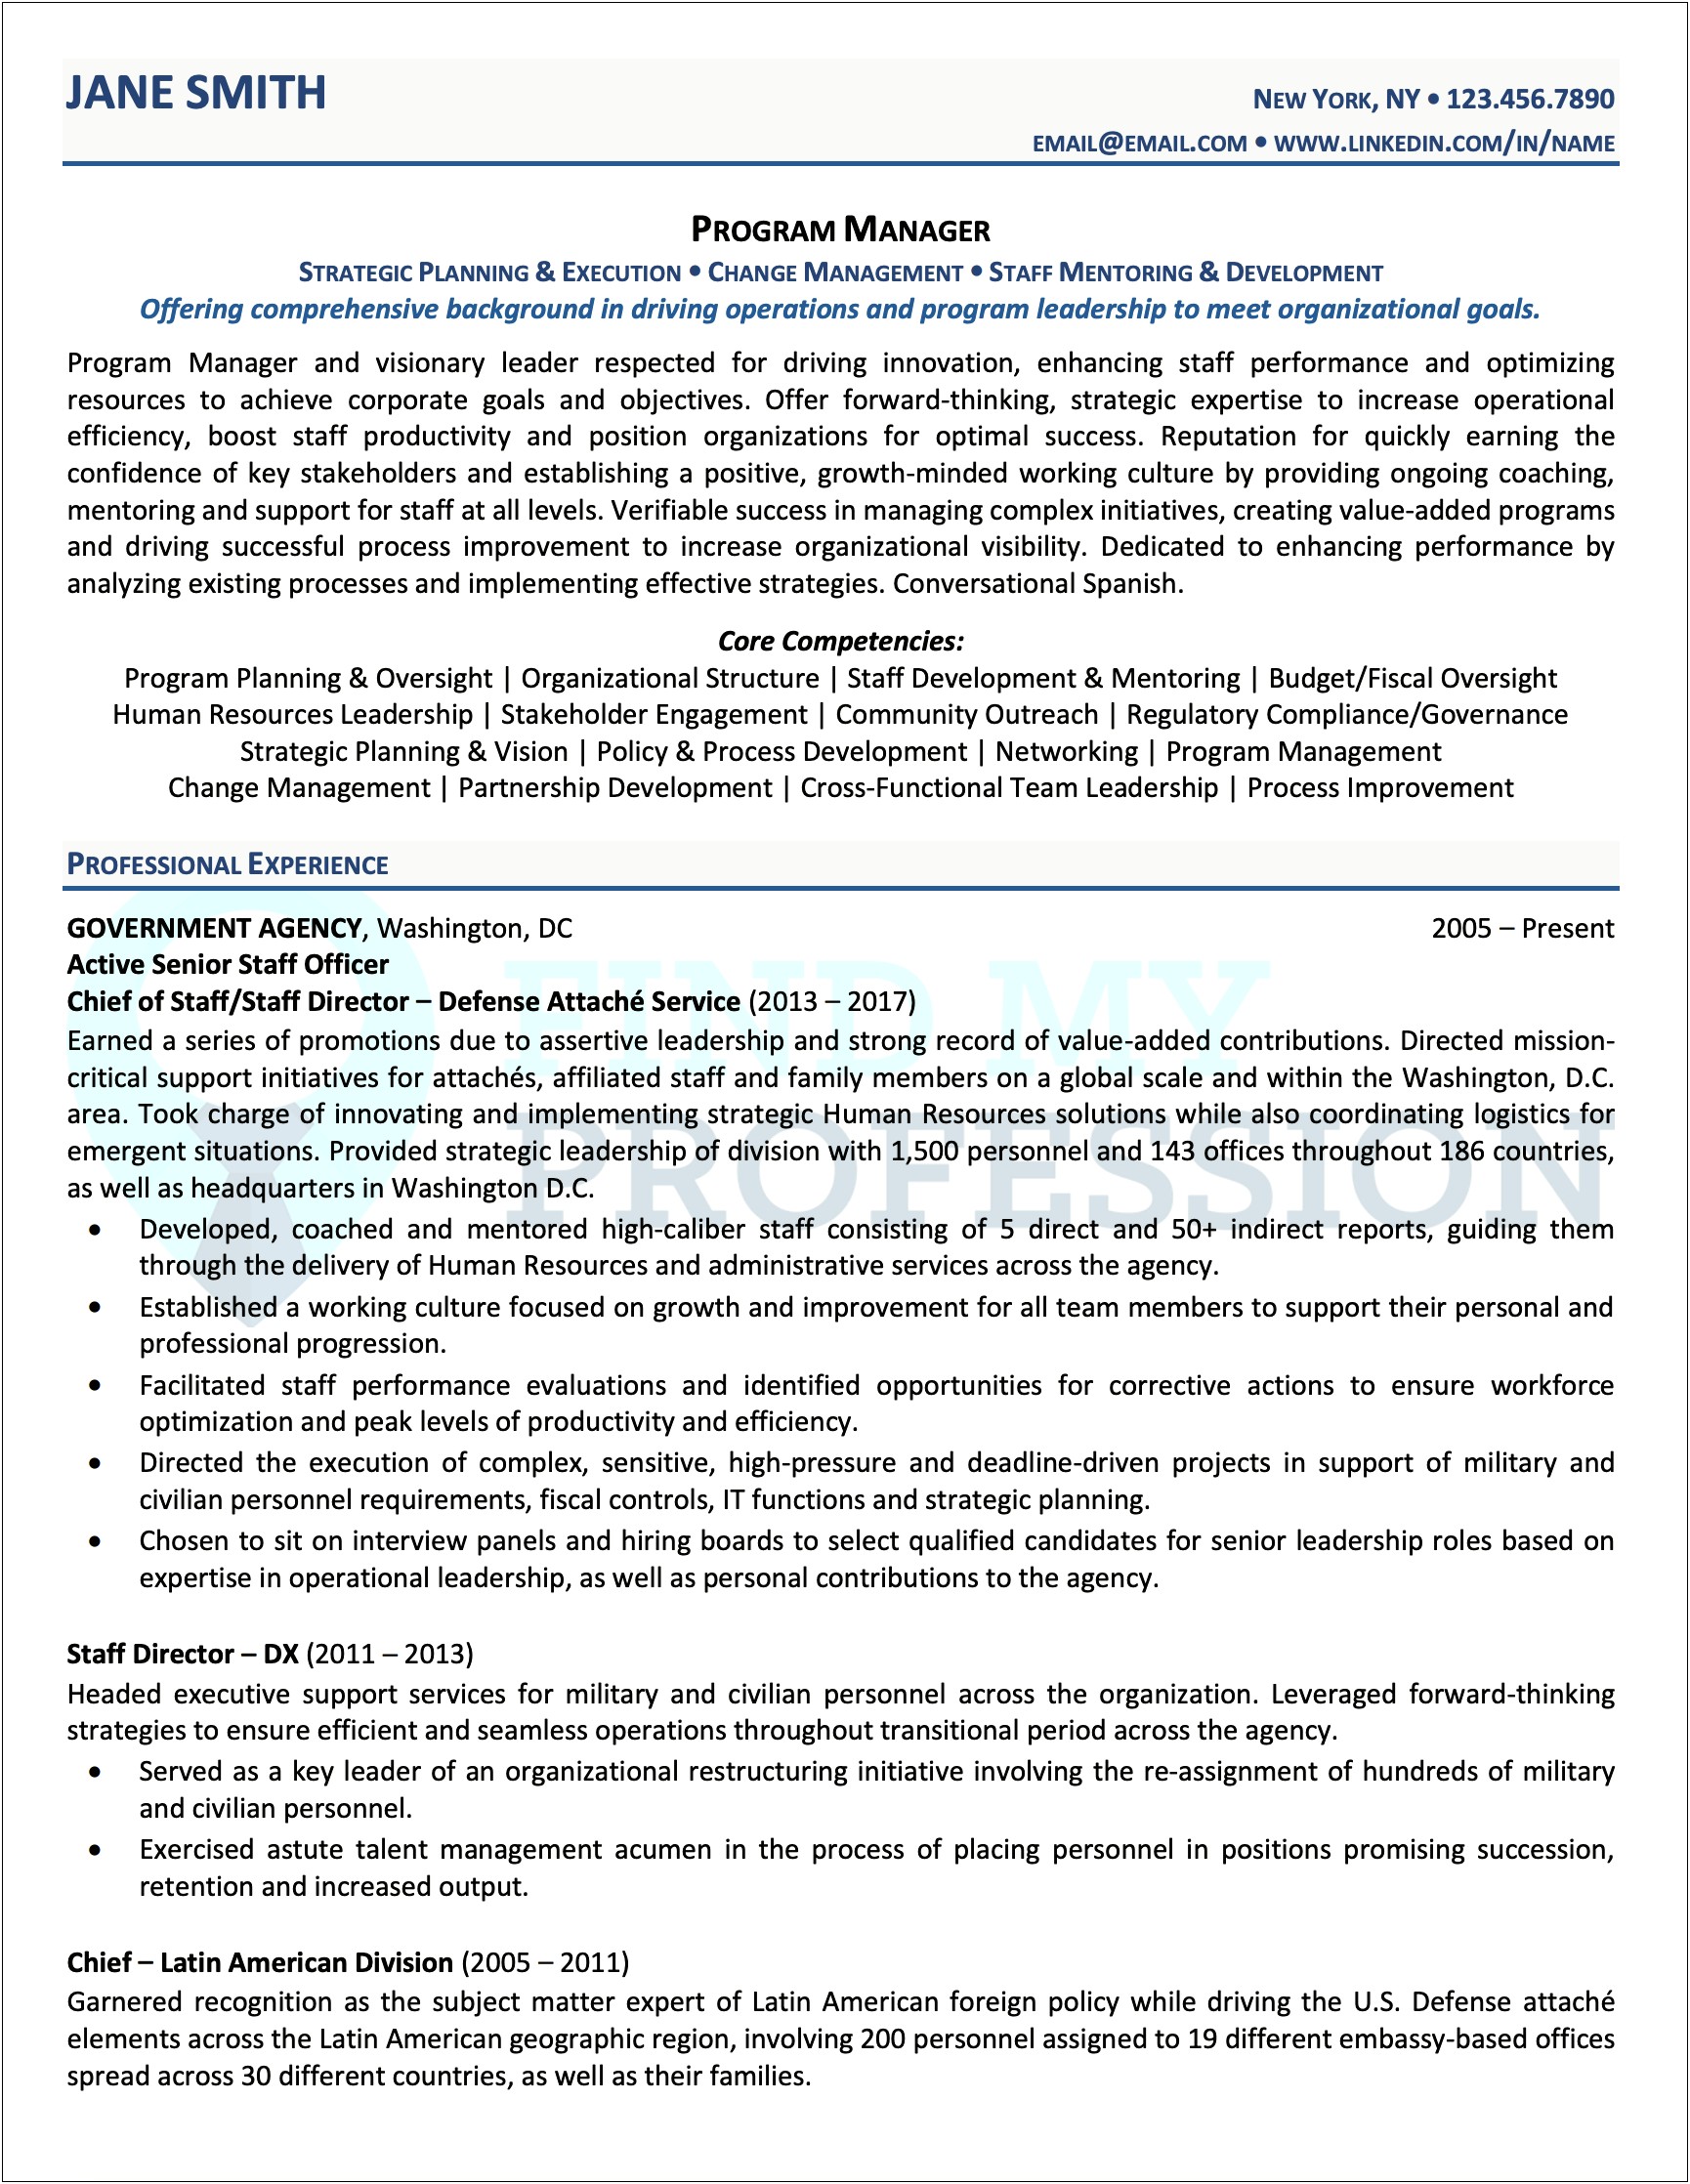 Outstanding Resume Examples For Government Contracting Management